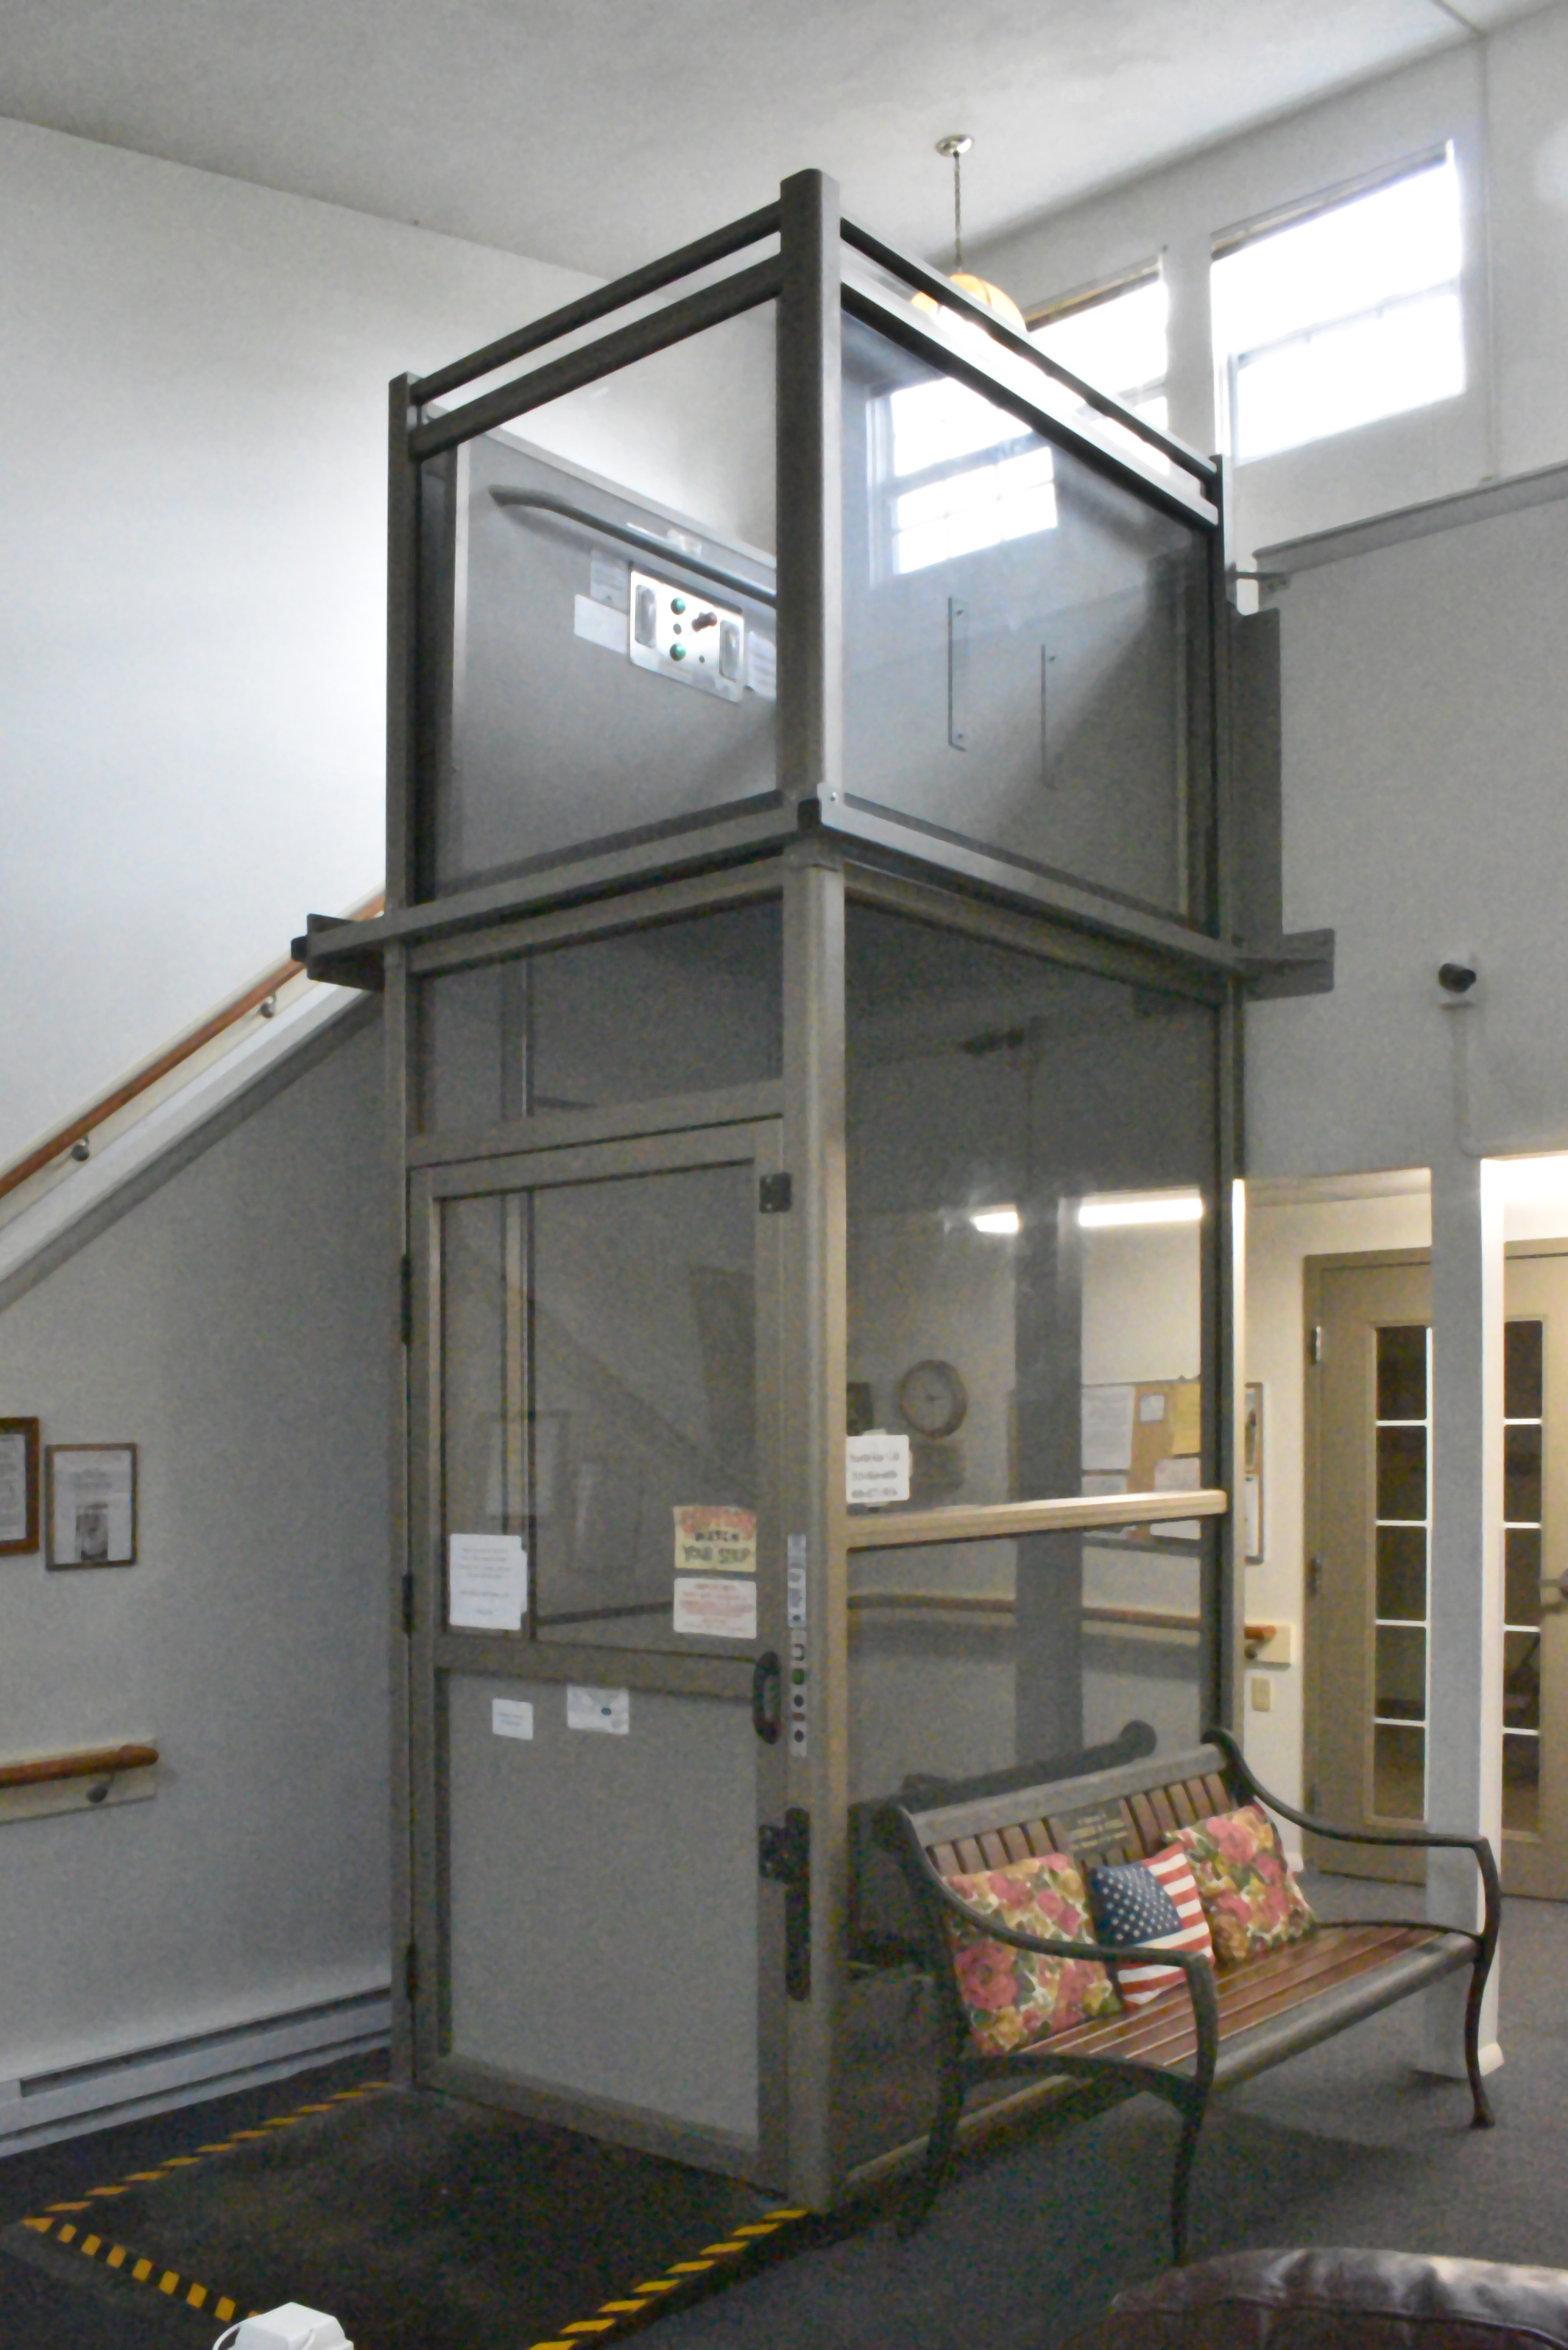 property management company client list syracuse ny image of lift in community room at gateway senior apartments